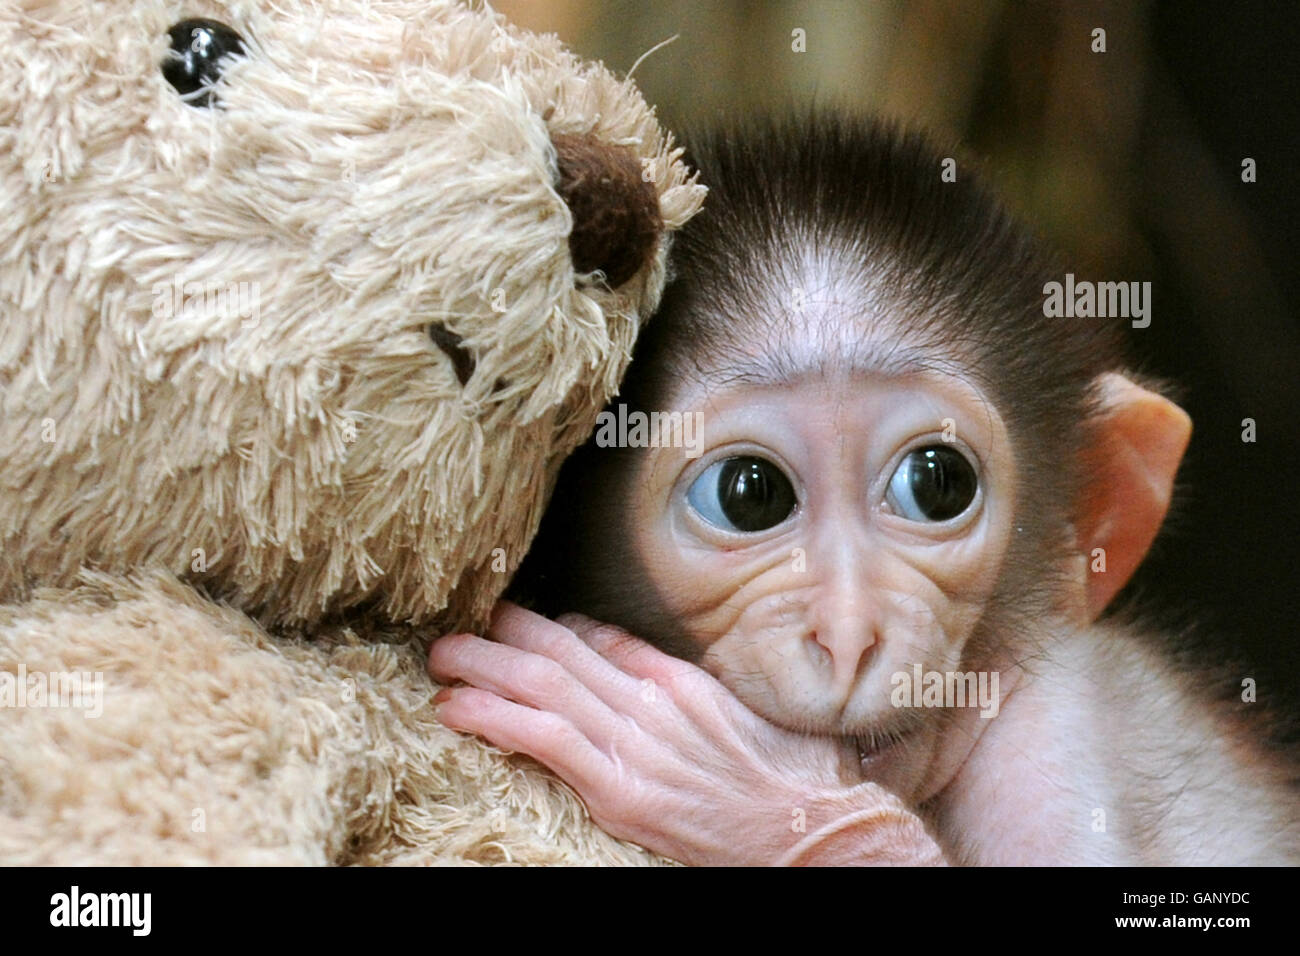 Conchita, a three week old white-naped mangabey monkey, who is currently hand rearing her following her mother's recuperation from a caesarian with help from a teddy bear who acts as a constant companion at London Zoo. Stock Photo